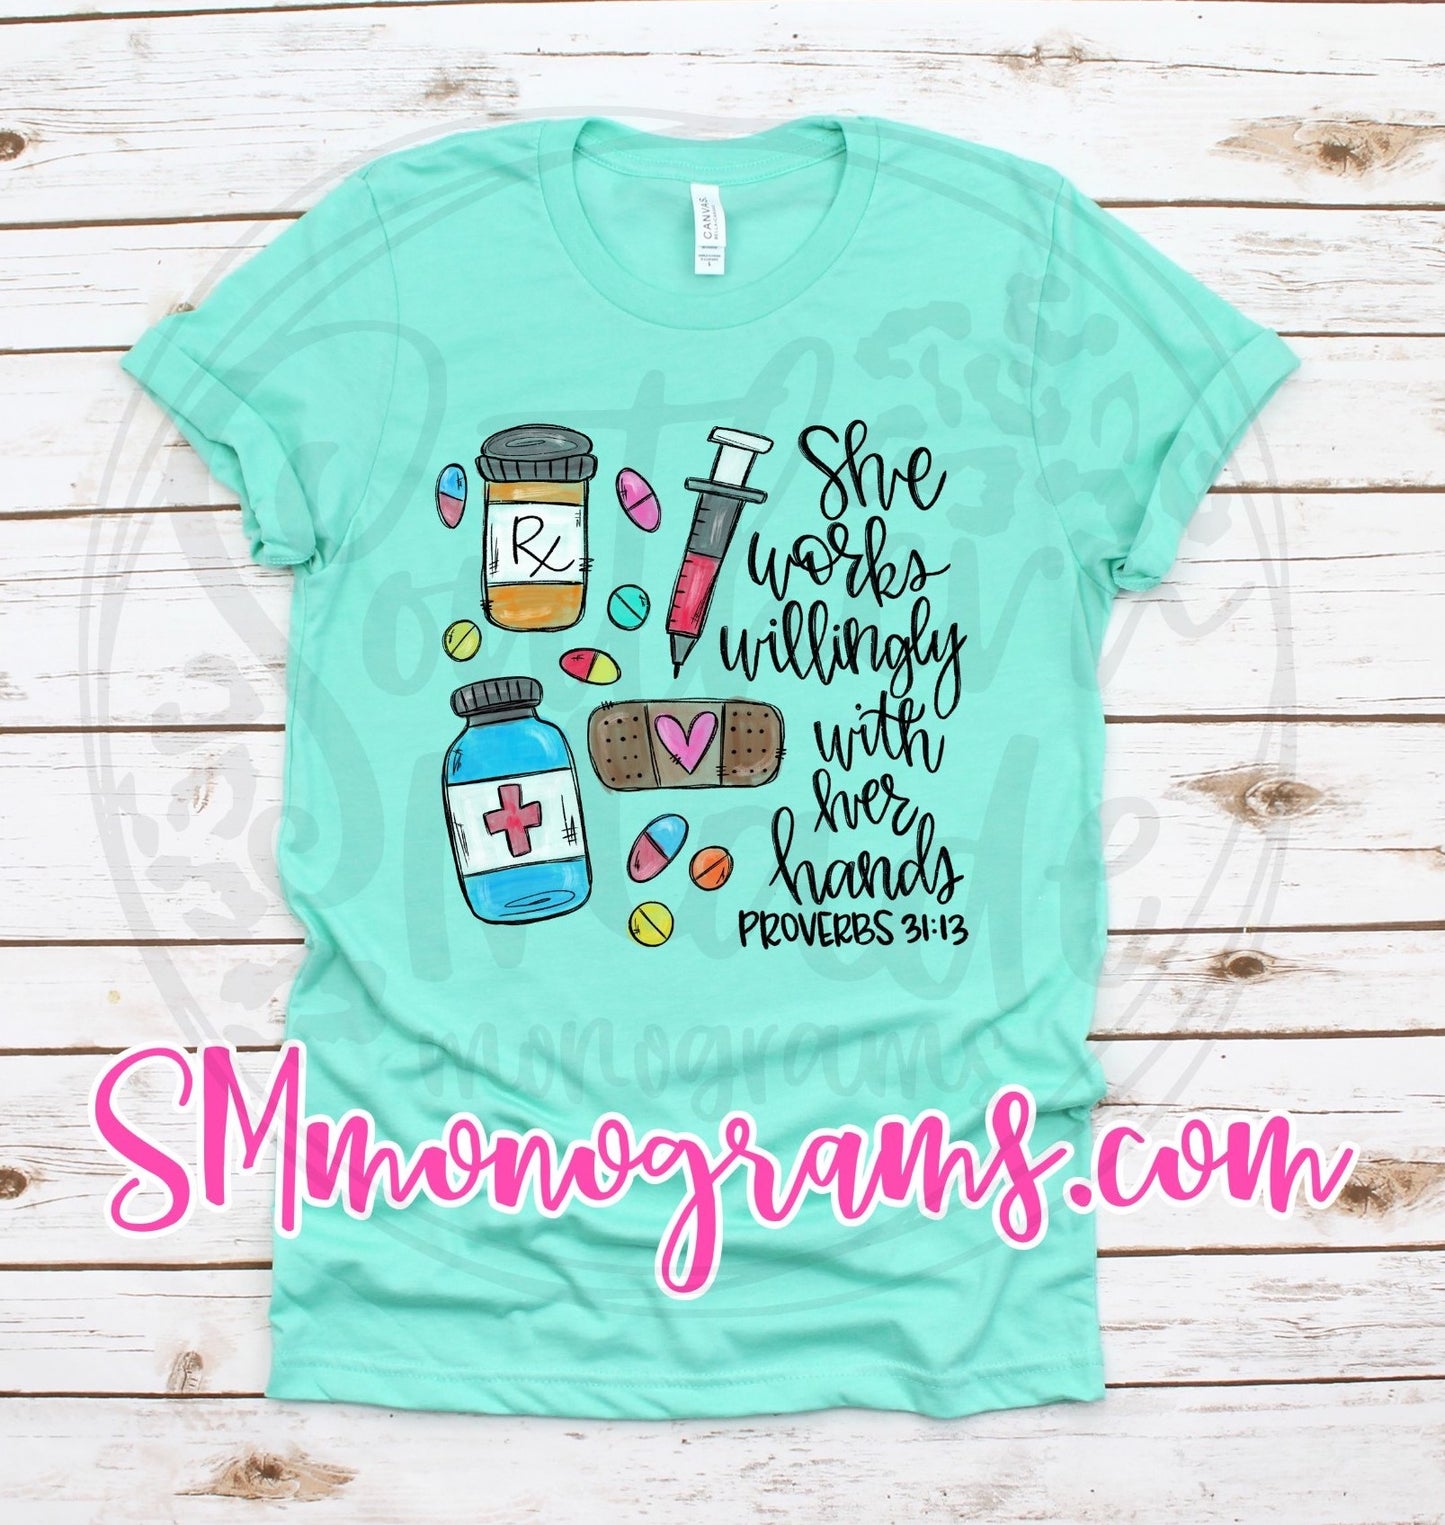 Pharmacist - She Works Willingly With Her Hands Proverbs 31:13 - Tee, Tank or Raglan